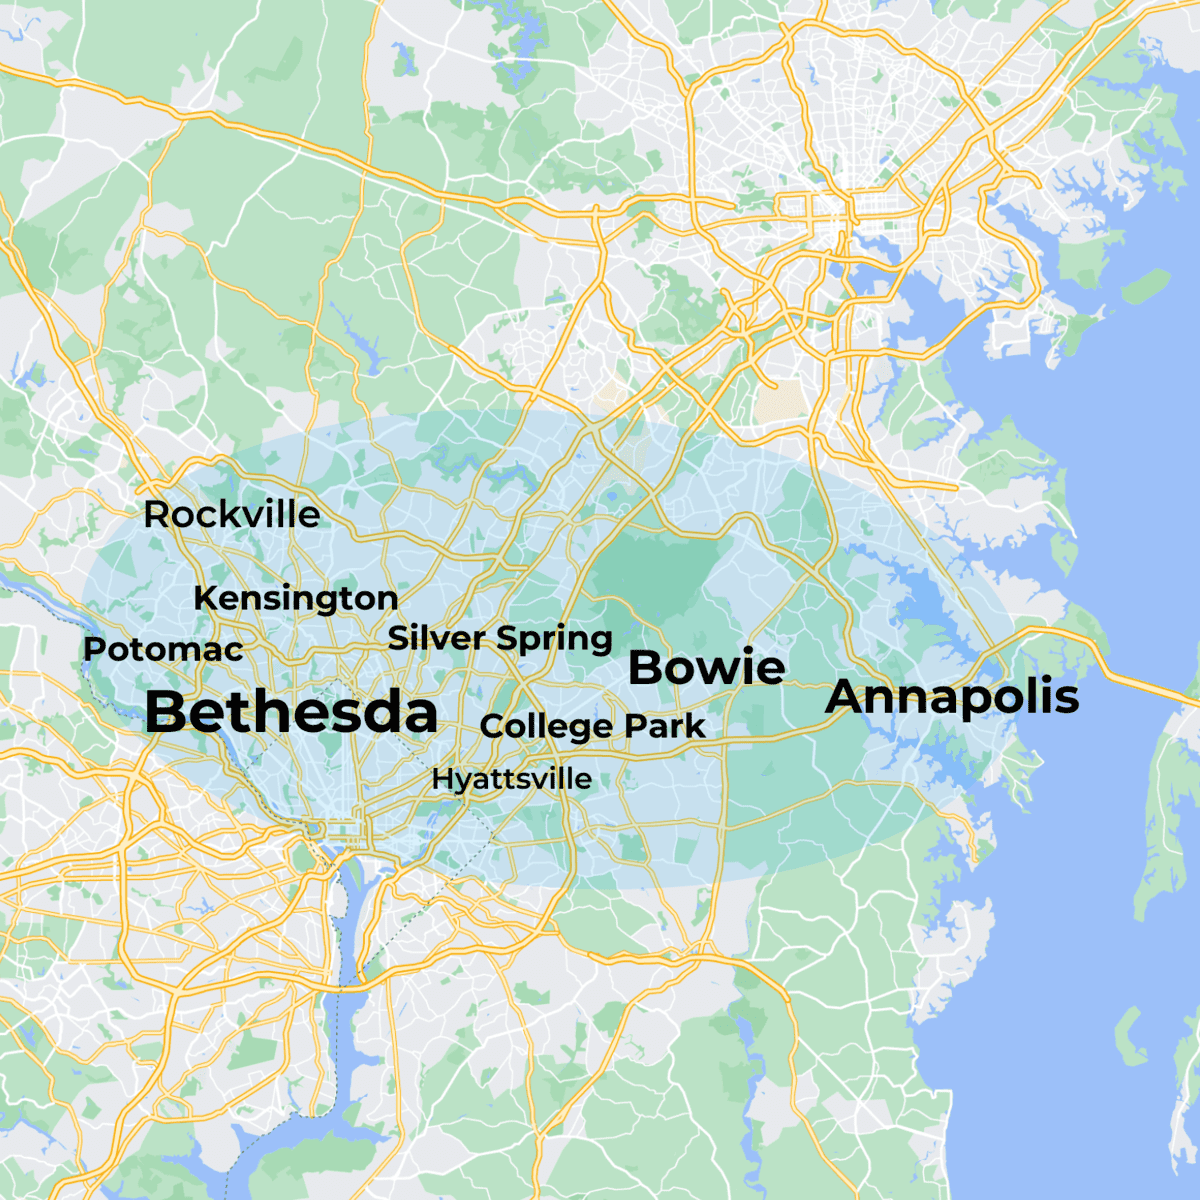 MovementX physical therapy services coverage map of Maryland including Bethesda, Bowie, Chevy Chase, Silver Spring, Annapolis, and College Park